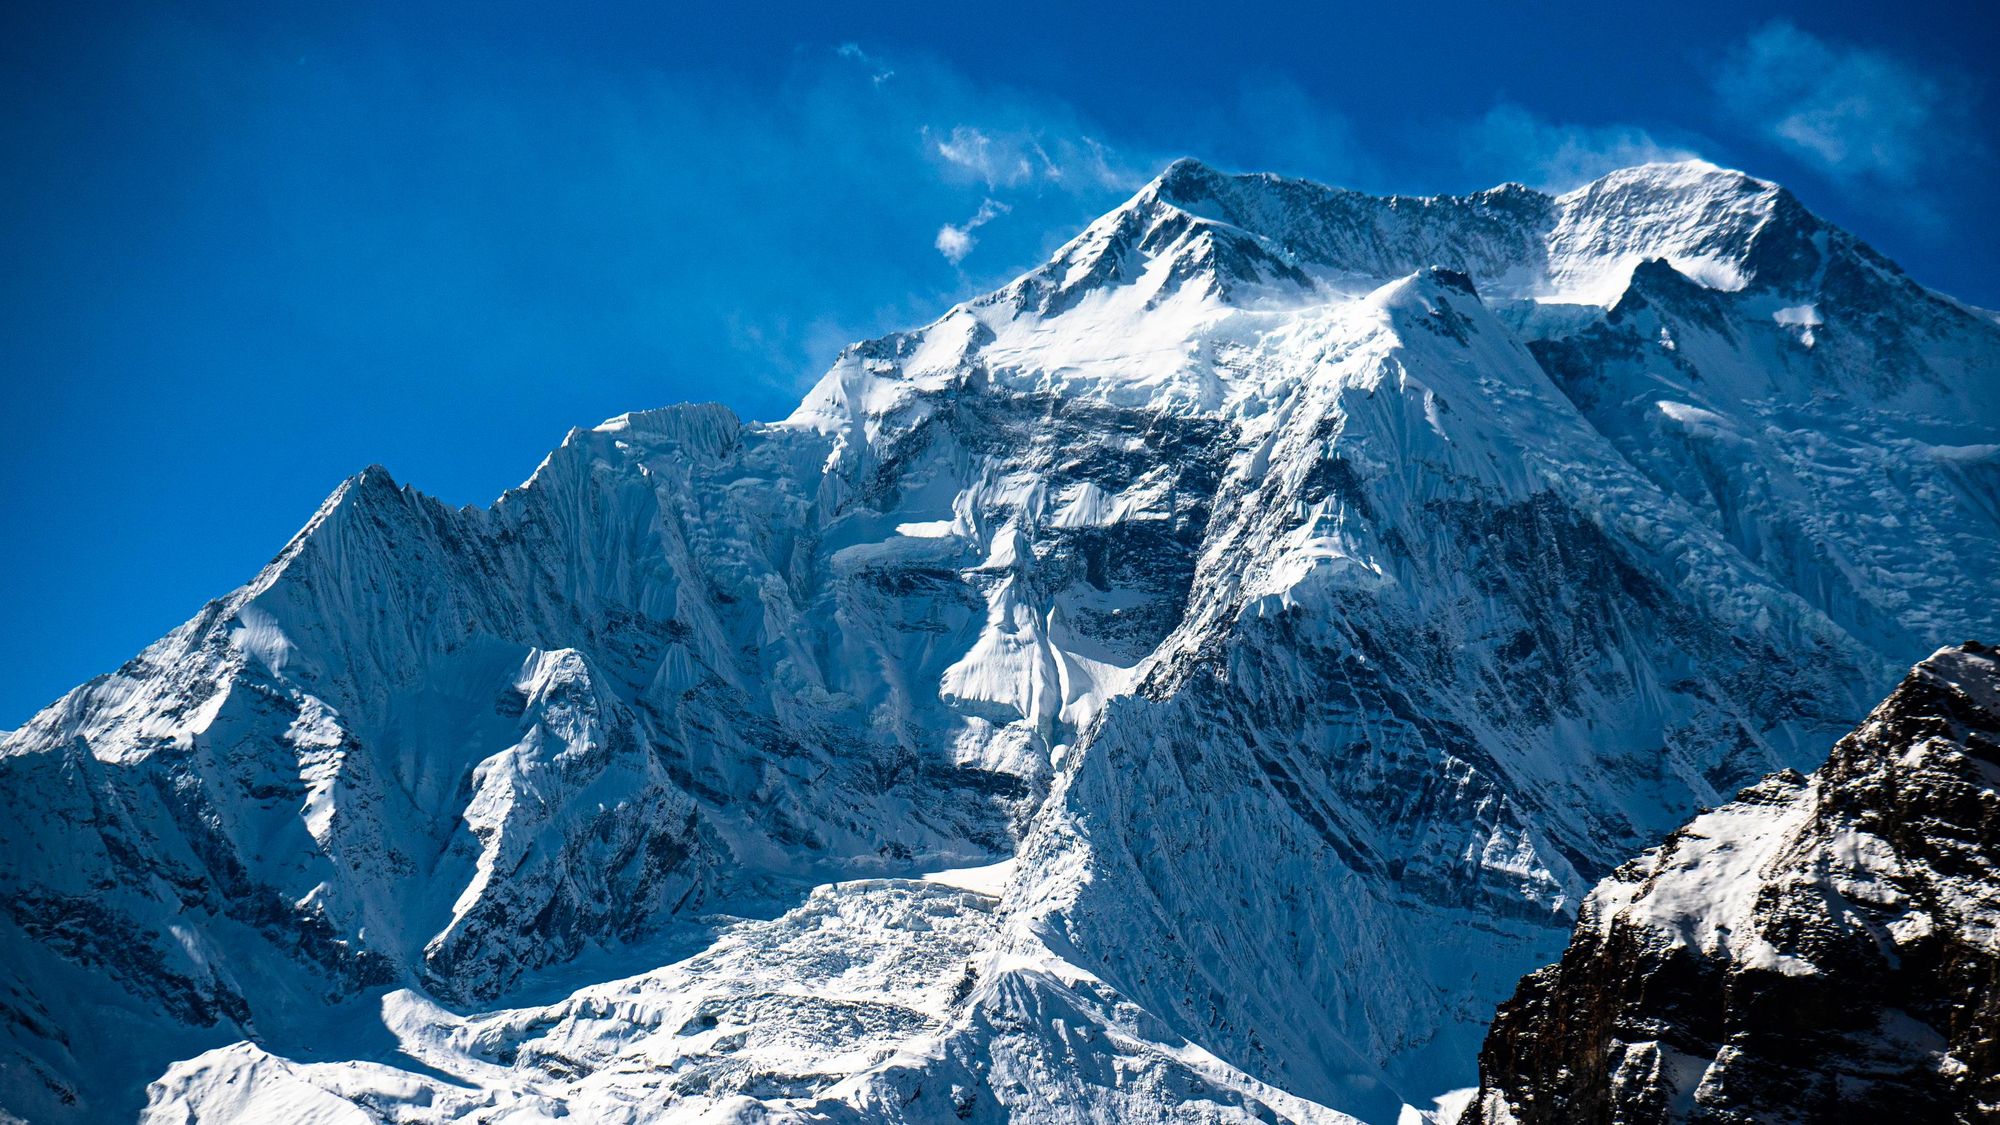 The mountains of the Himalayas are not to be taken lightly. Photo: Josh Edwards